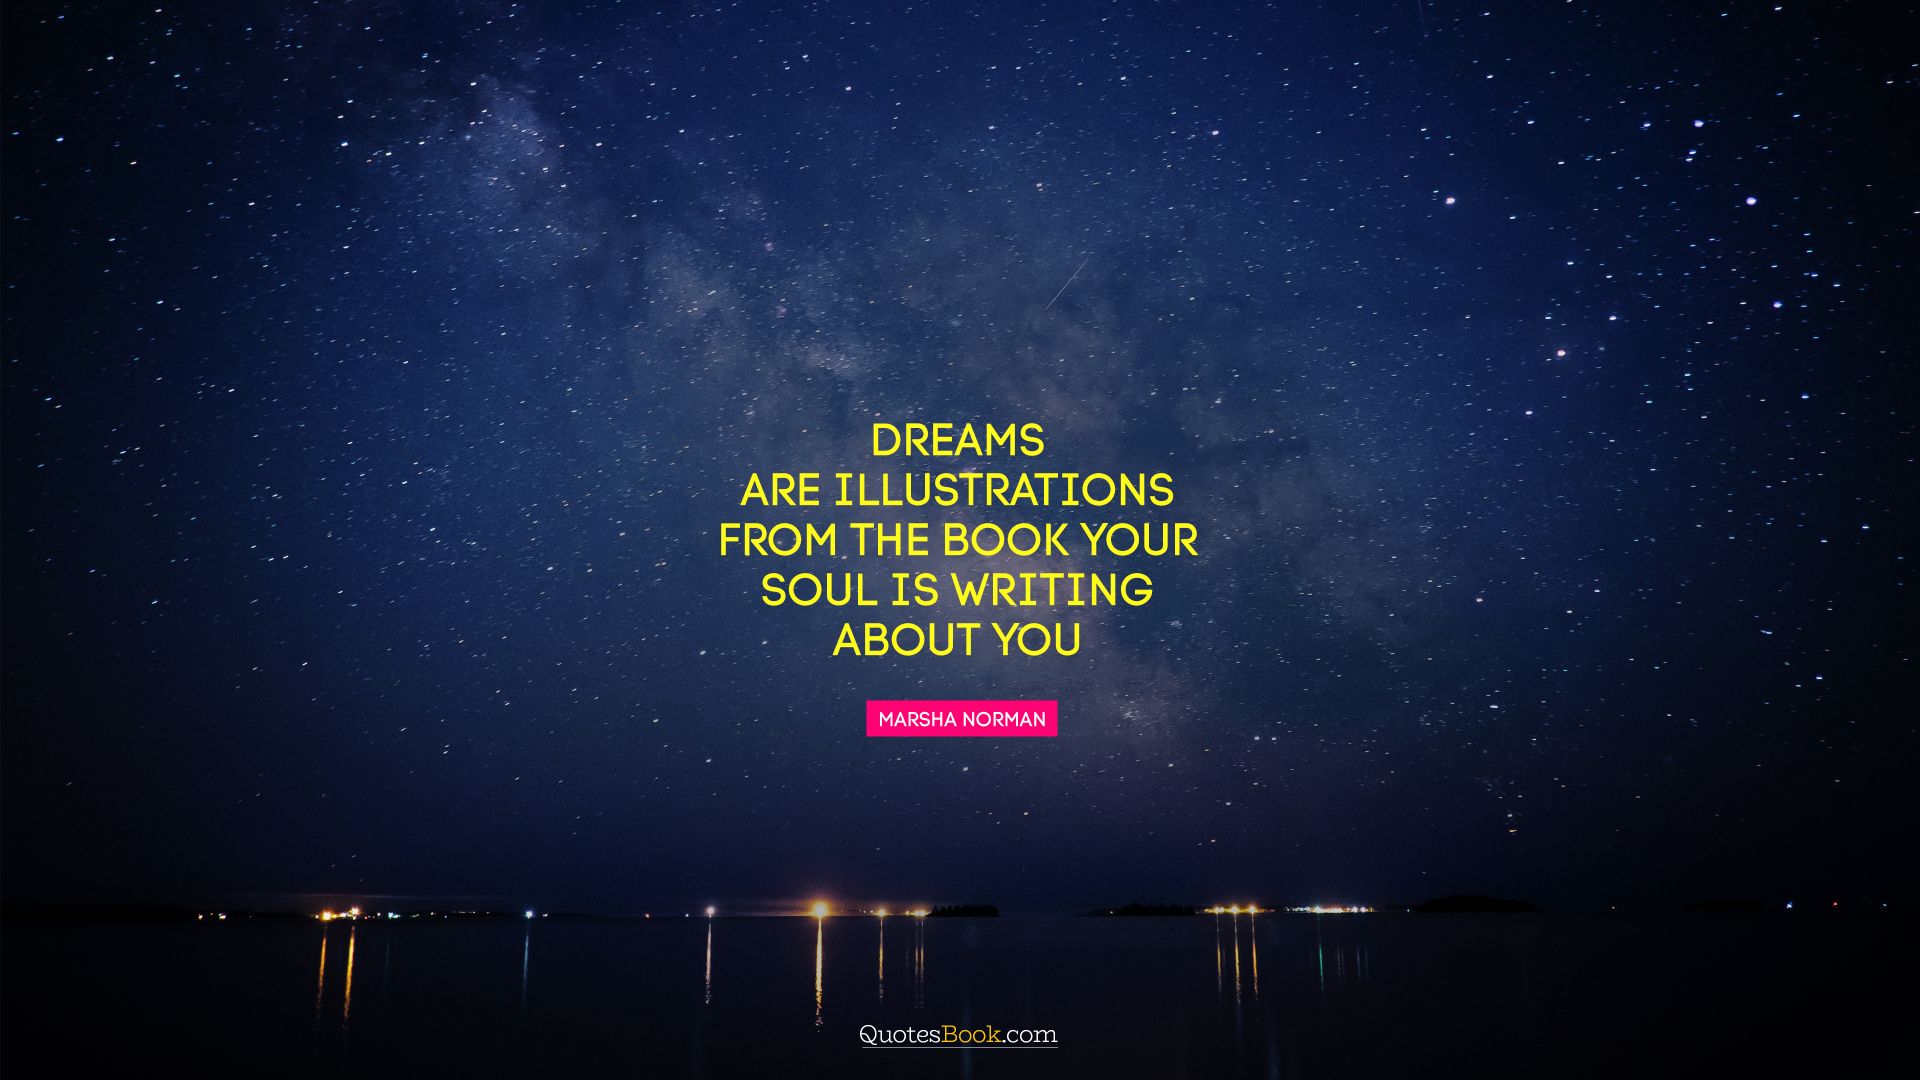 Dreams are illustrations from the book your soul is writing about you. - Quote by Marsha Norman